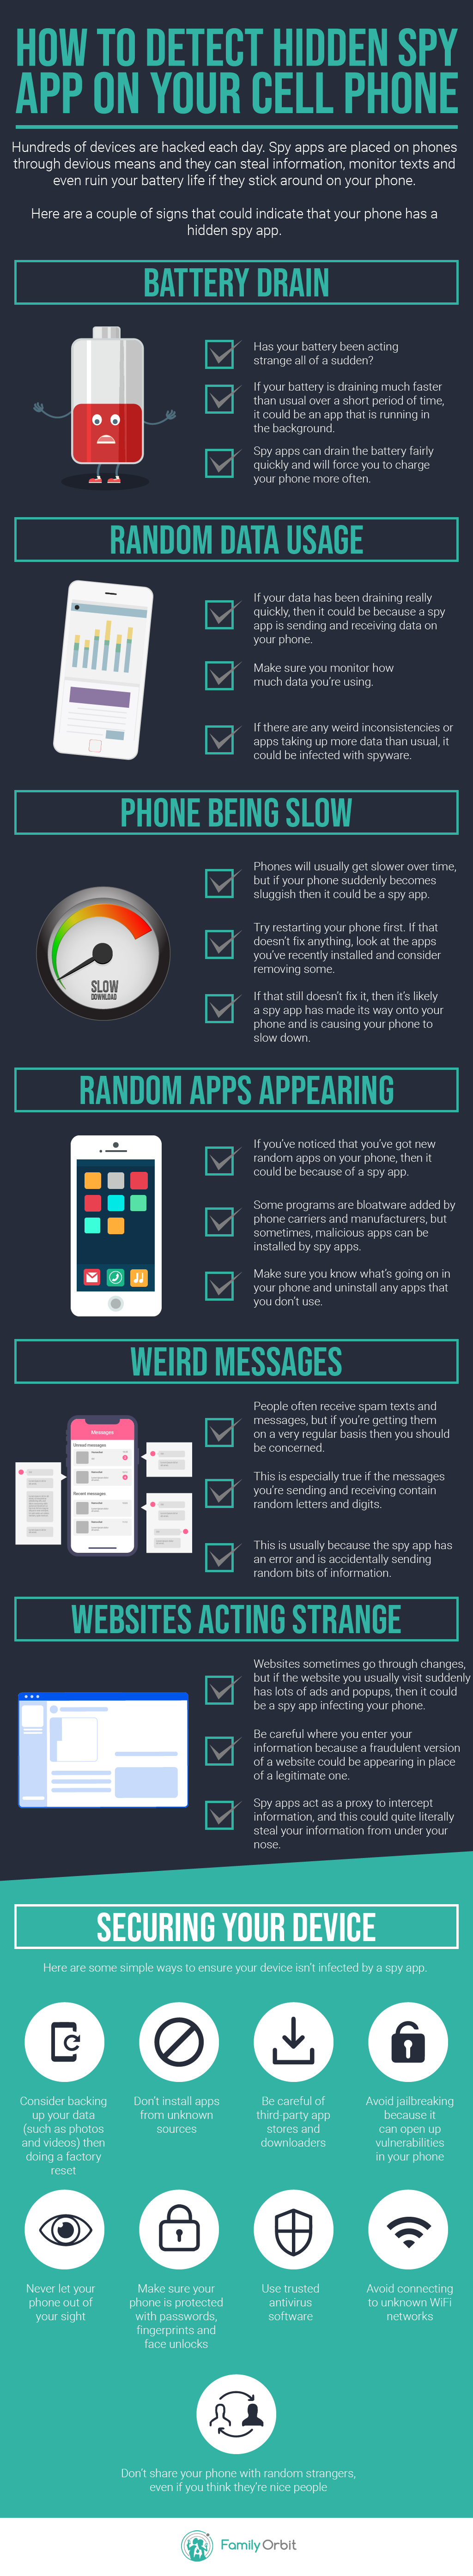 detect-hidden-spyware-android-iphone-infographic-plaza